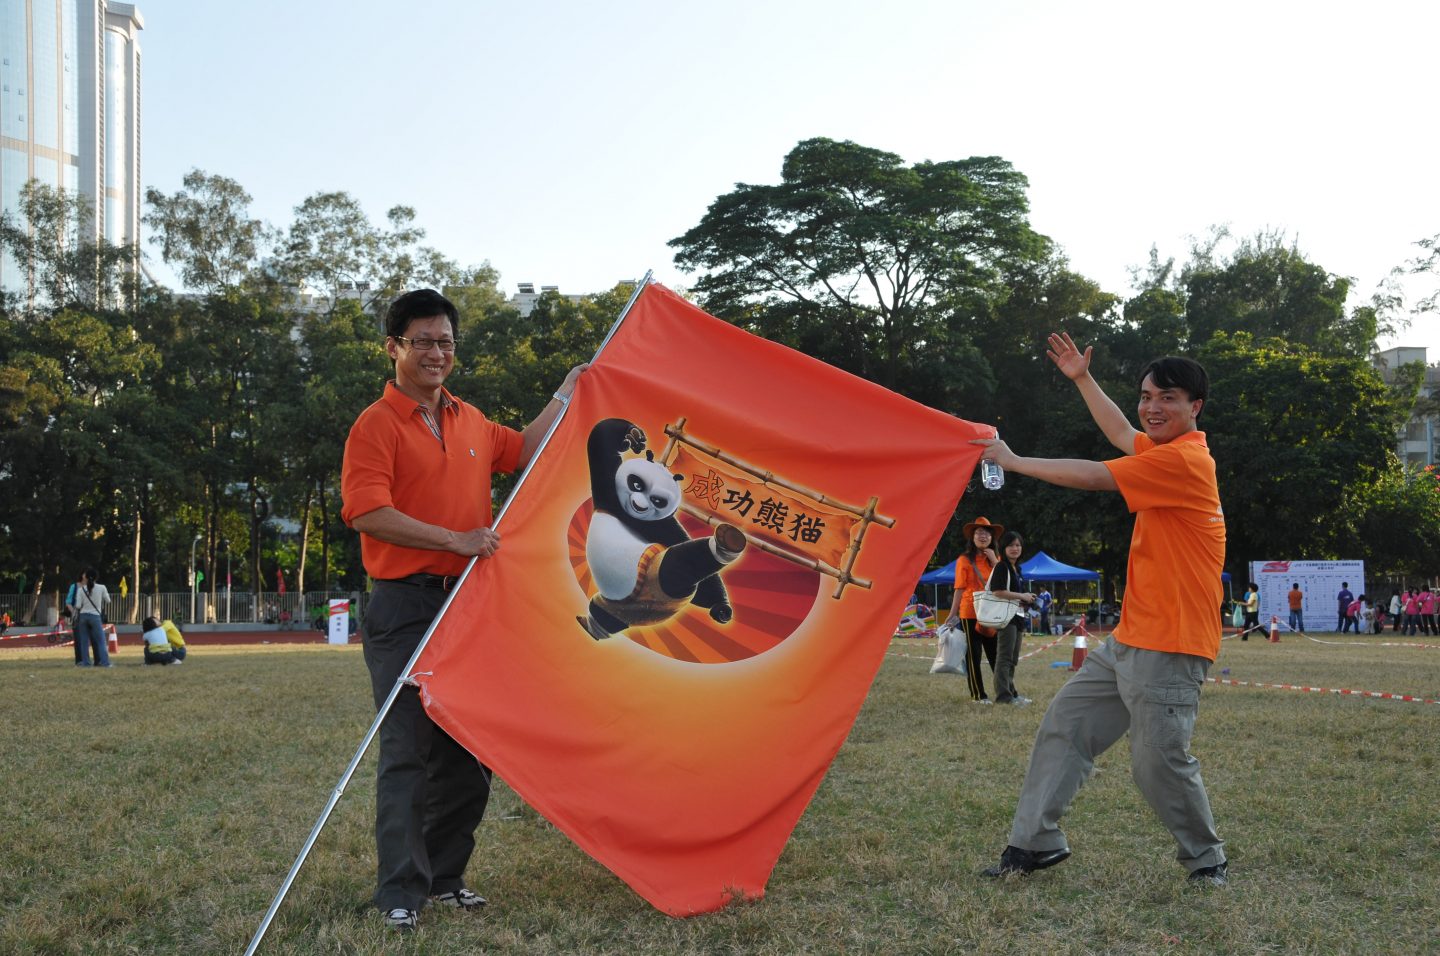 Raymond at a sports teambuilding event in China in 2009.